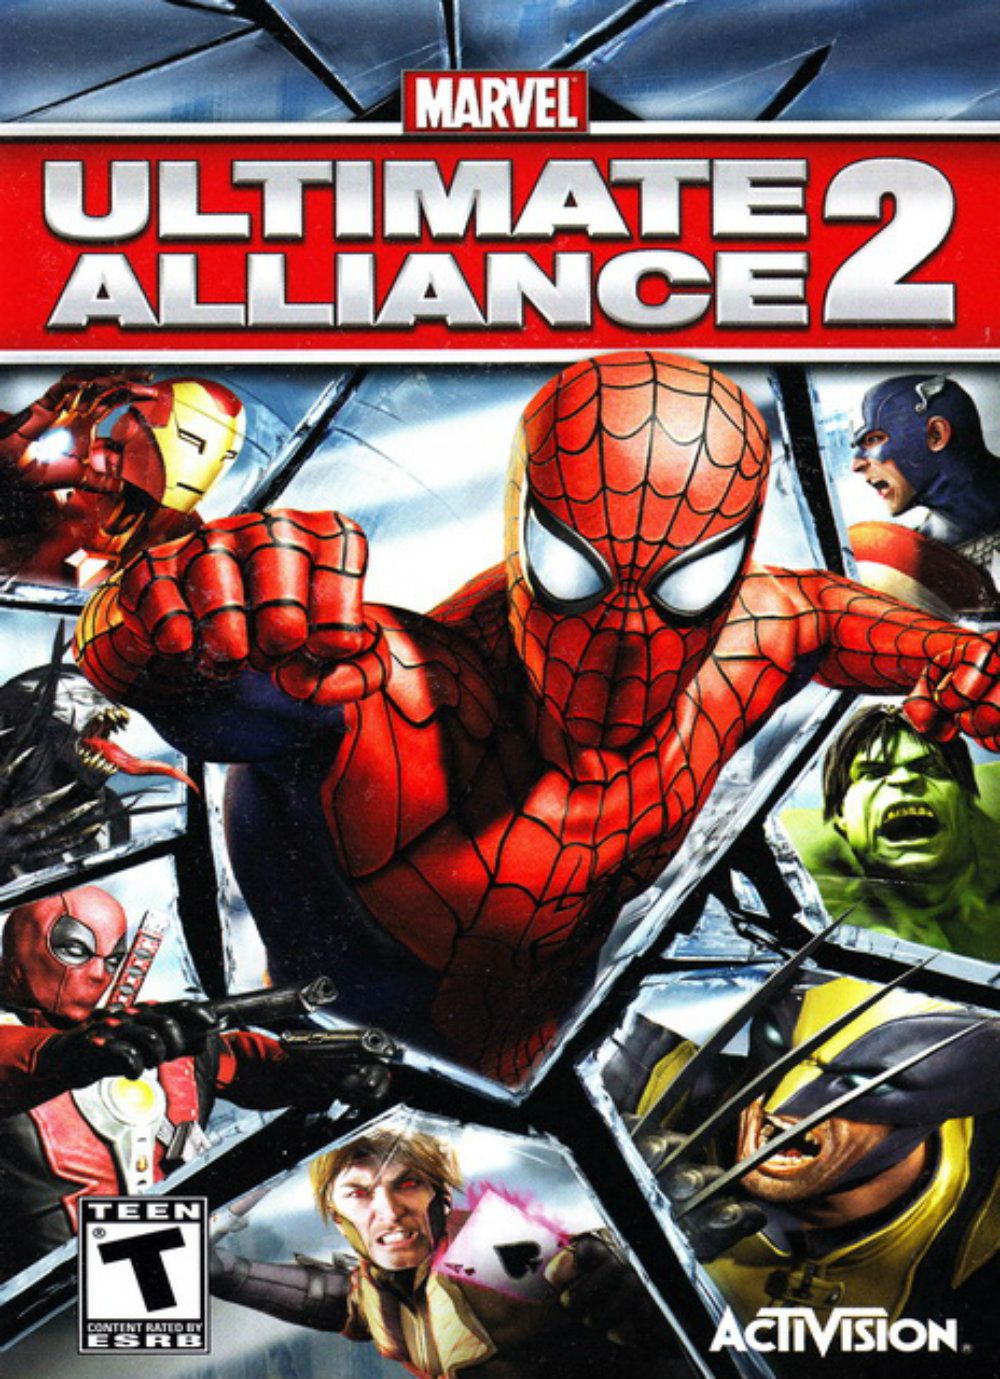 marvel ultimate alliance 2 cheats xbox 360 all powers